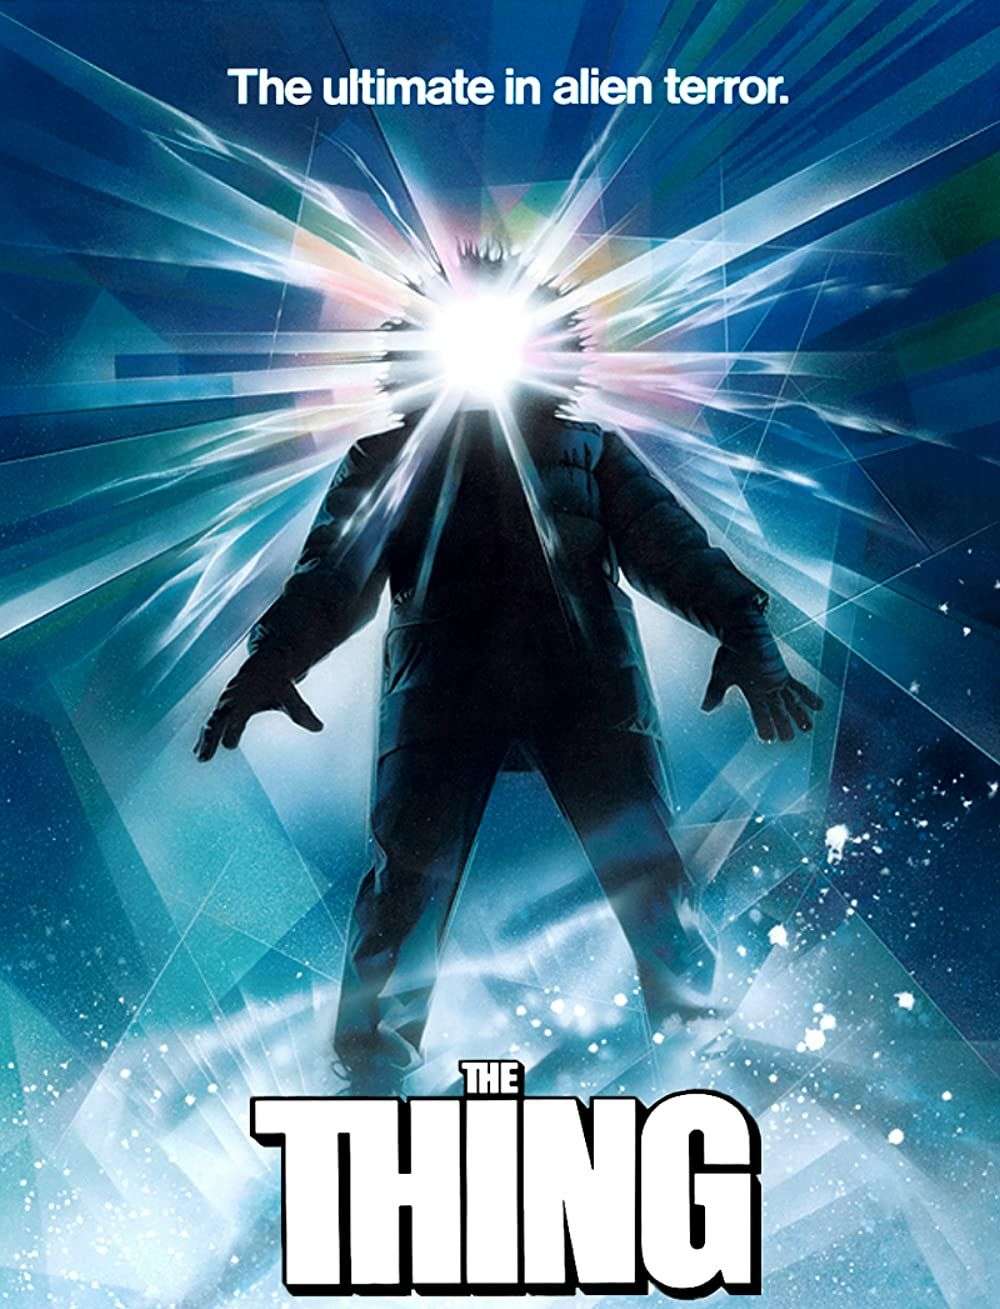 Let's Explore The 1st Apocalypse Trilogy Movie - The Thing (1982)